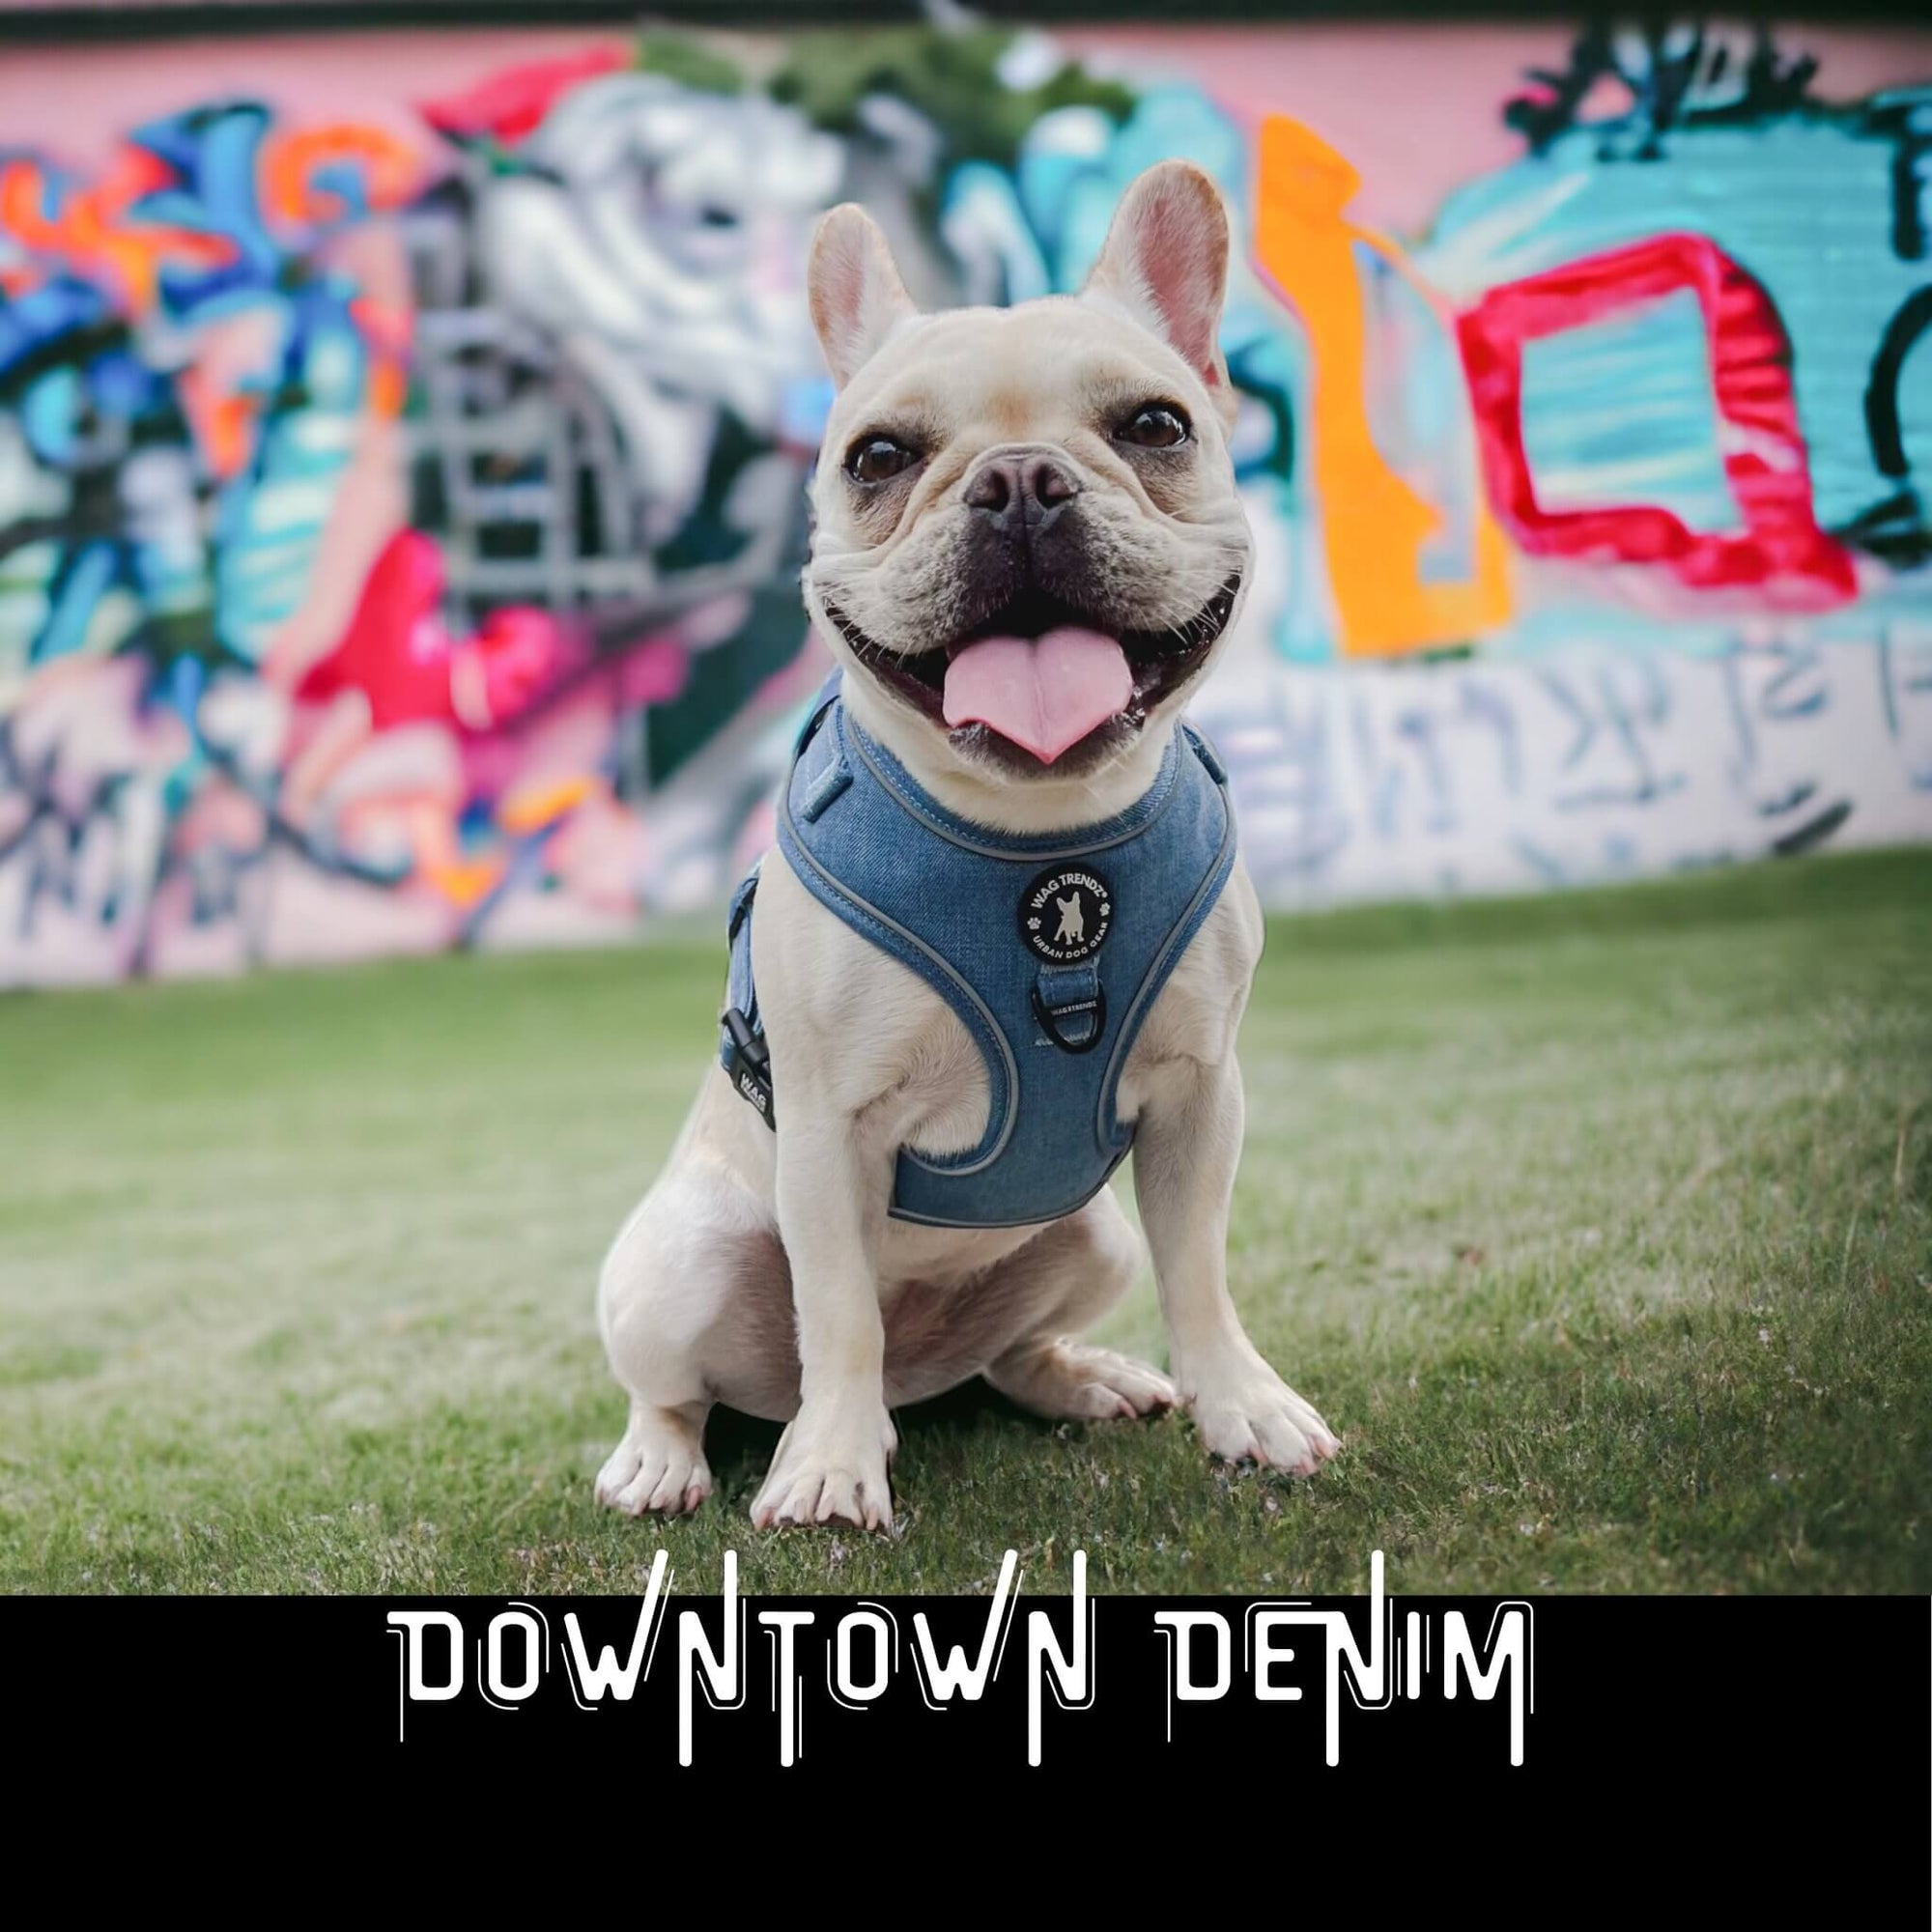 No Pull Dog Harness worn by French Bulldog sitting in grass with colorful graffiti wall in background 